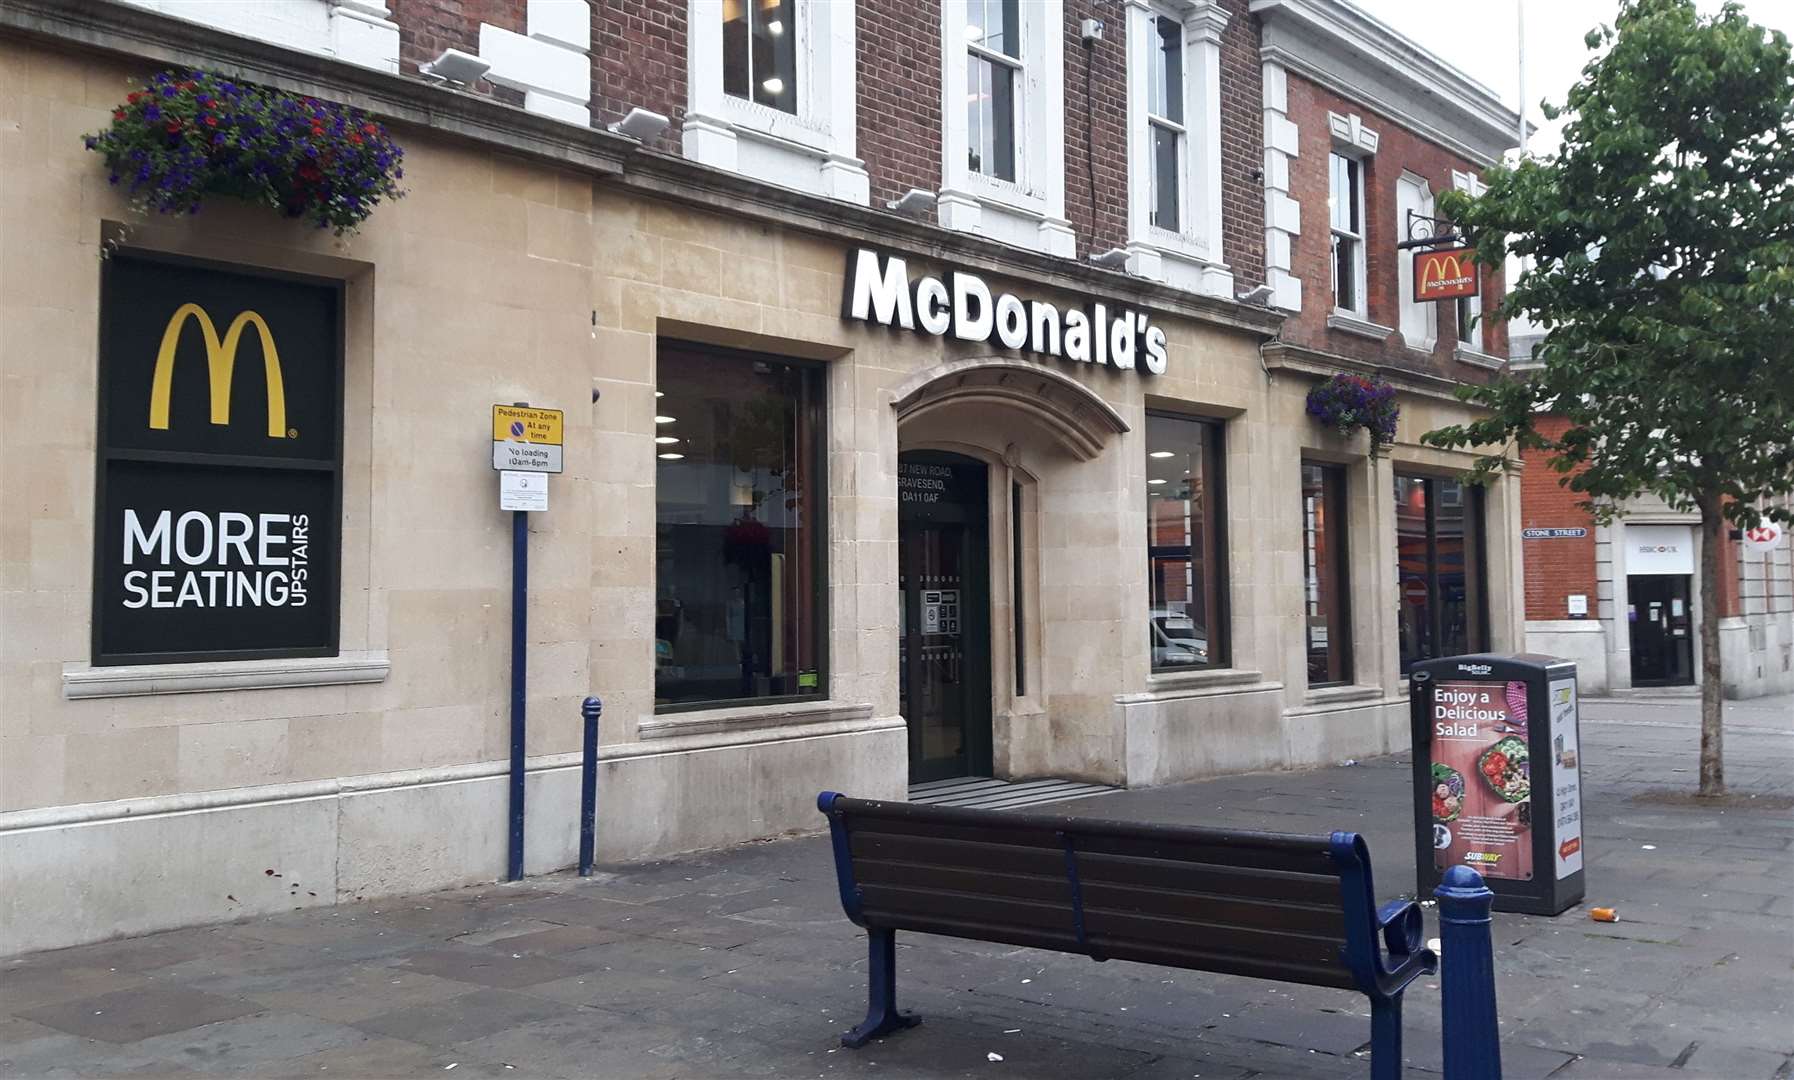 The McDonalds restaurant in New Road in Gravesend where the attack took place